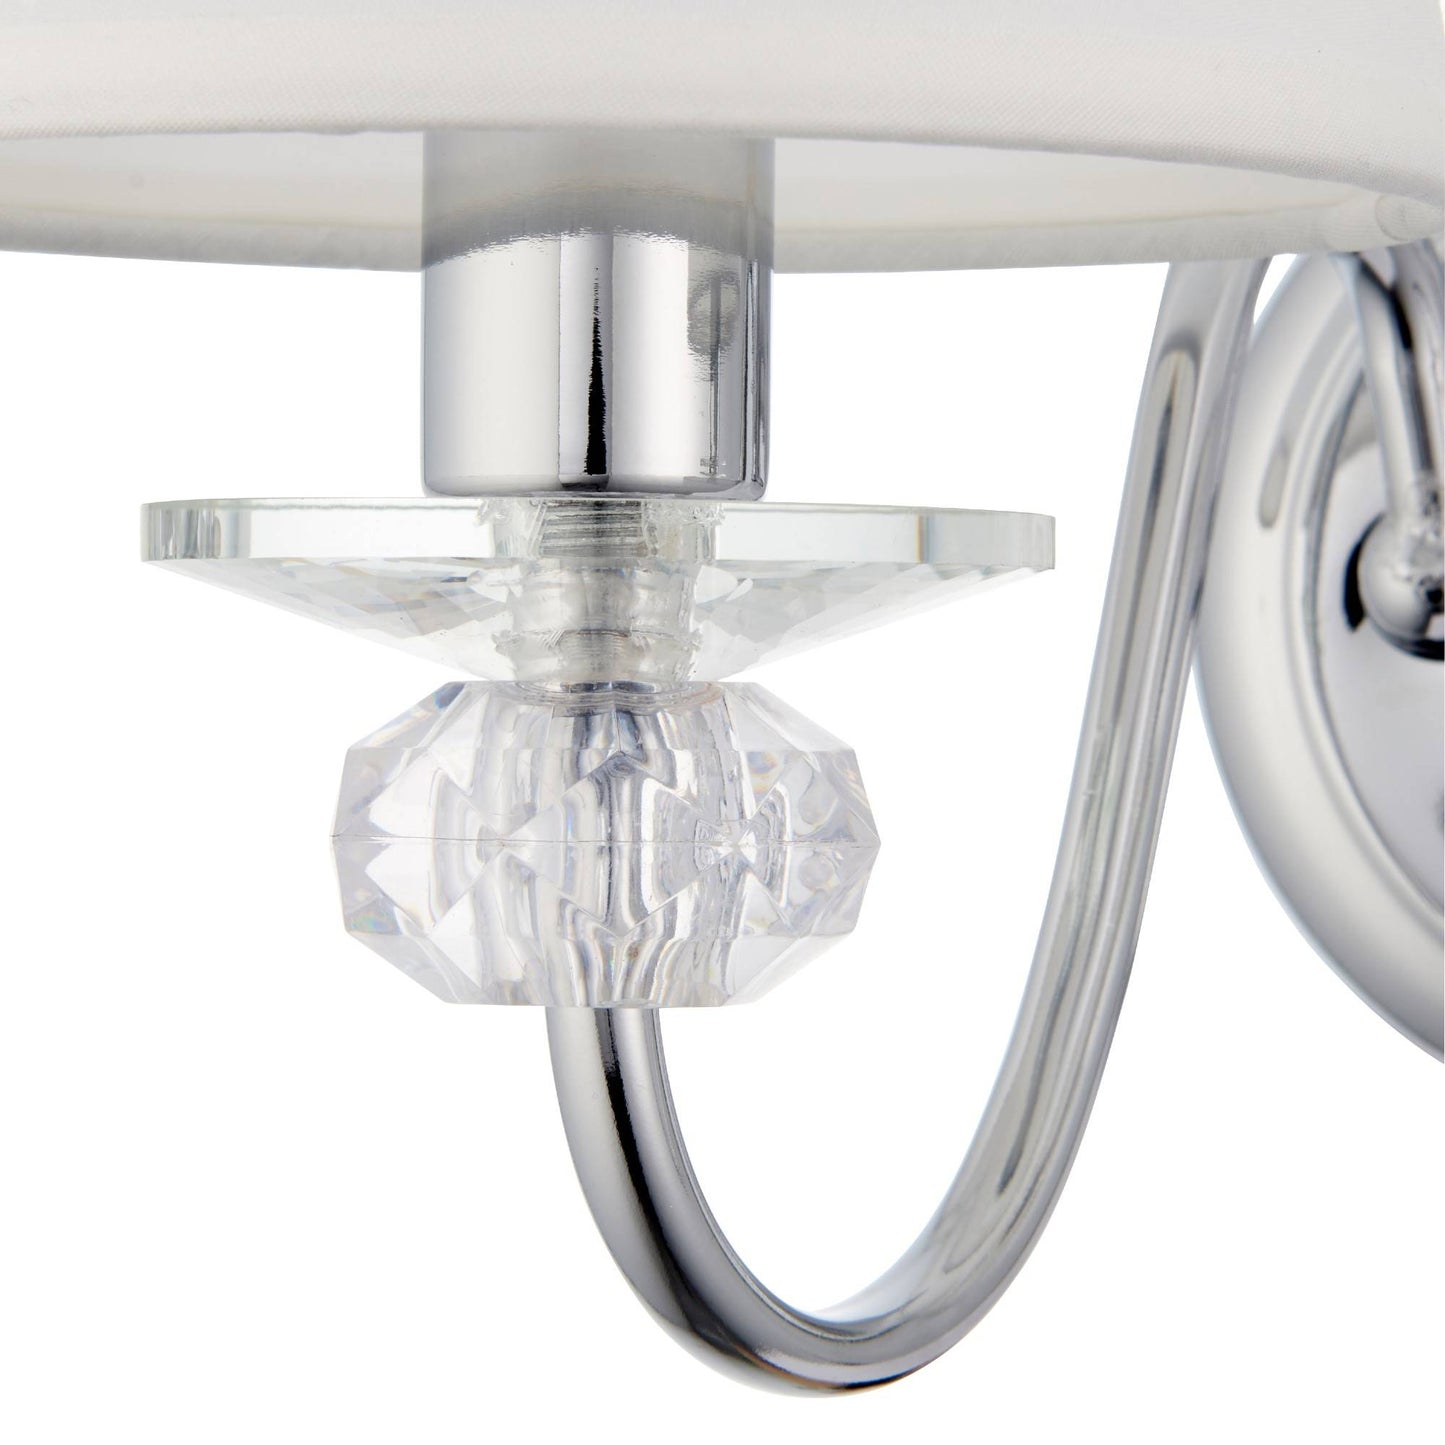 Rada 2 Light Polished Chrome and Clear Acrylic Indoor Wall Light with White Fabric Shades